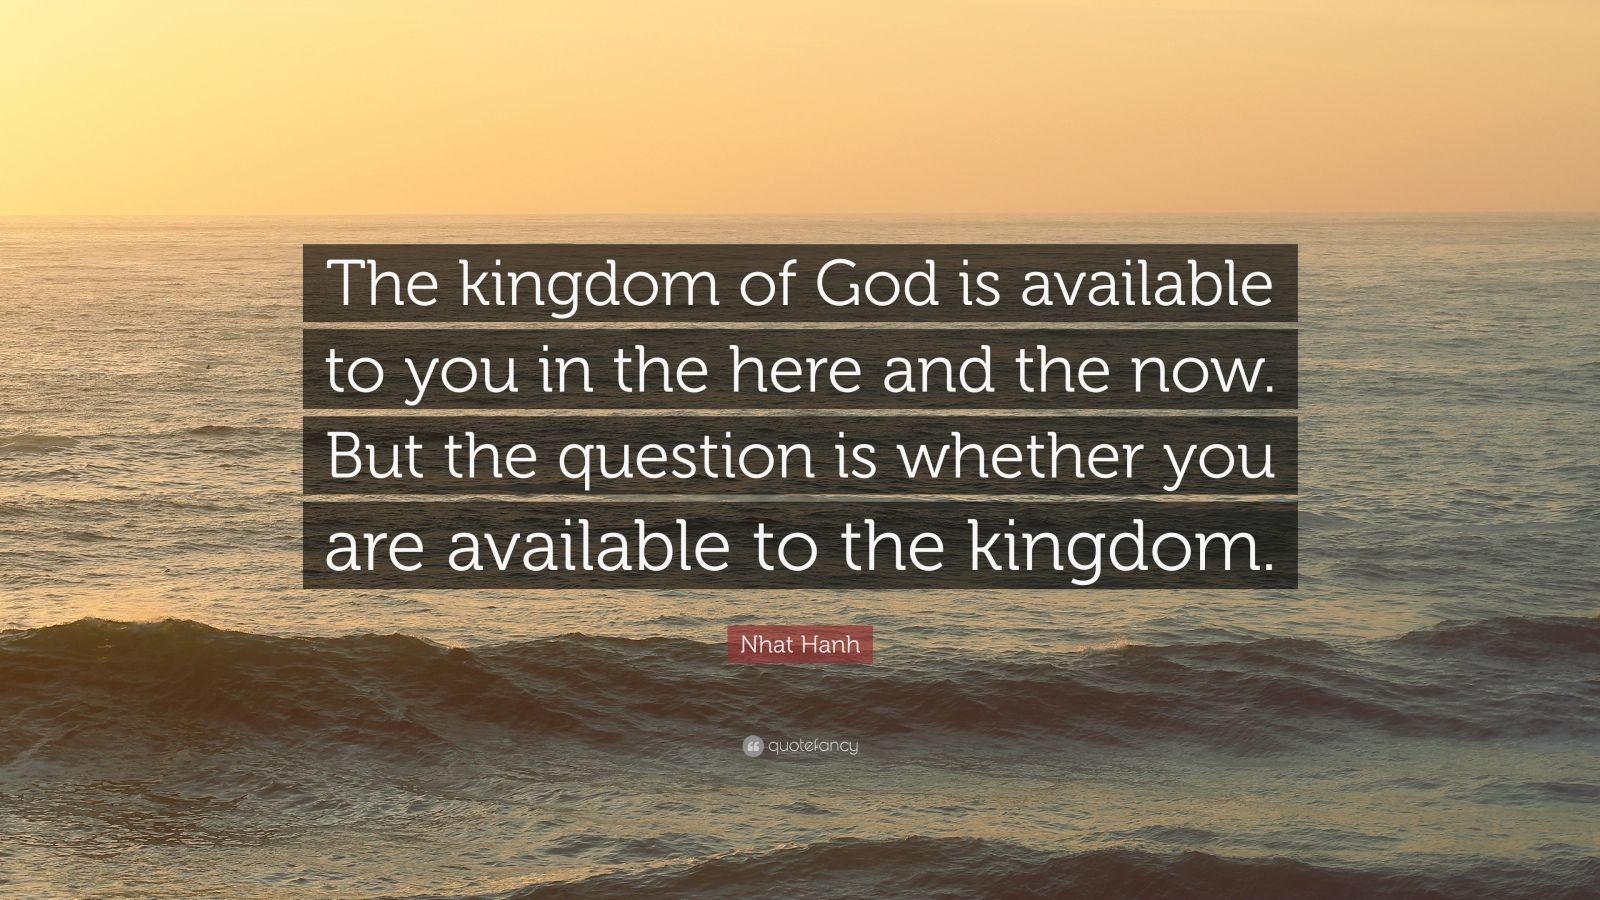 Nhat Hanh Quote “The kingdom of God is available to you